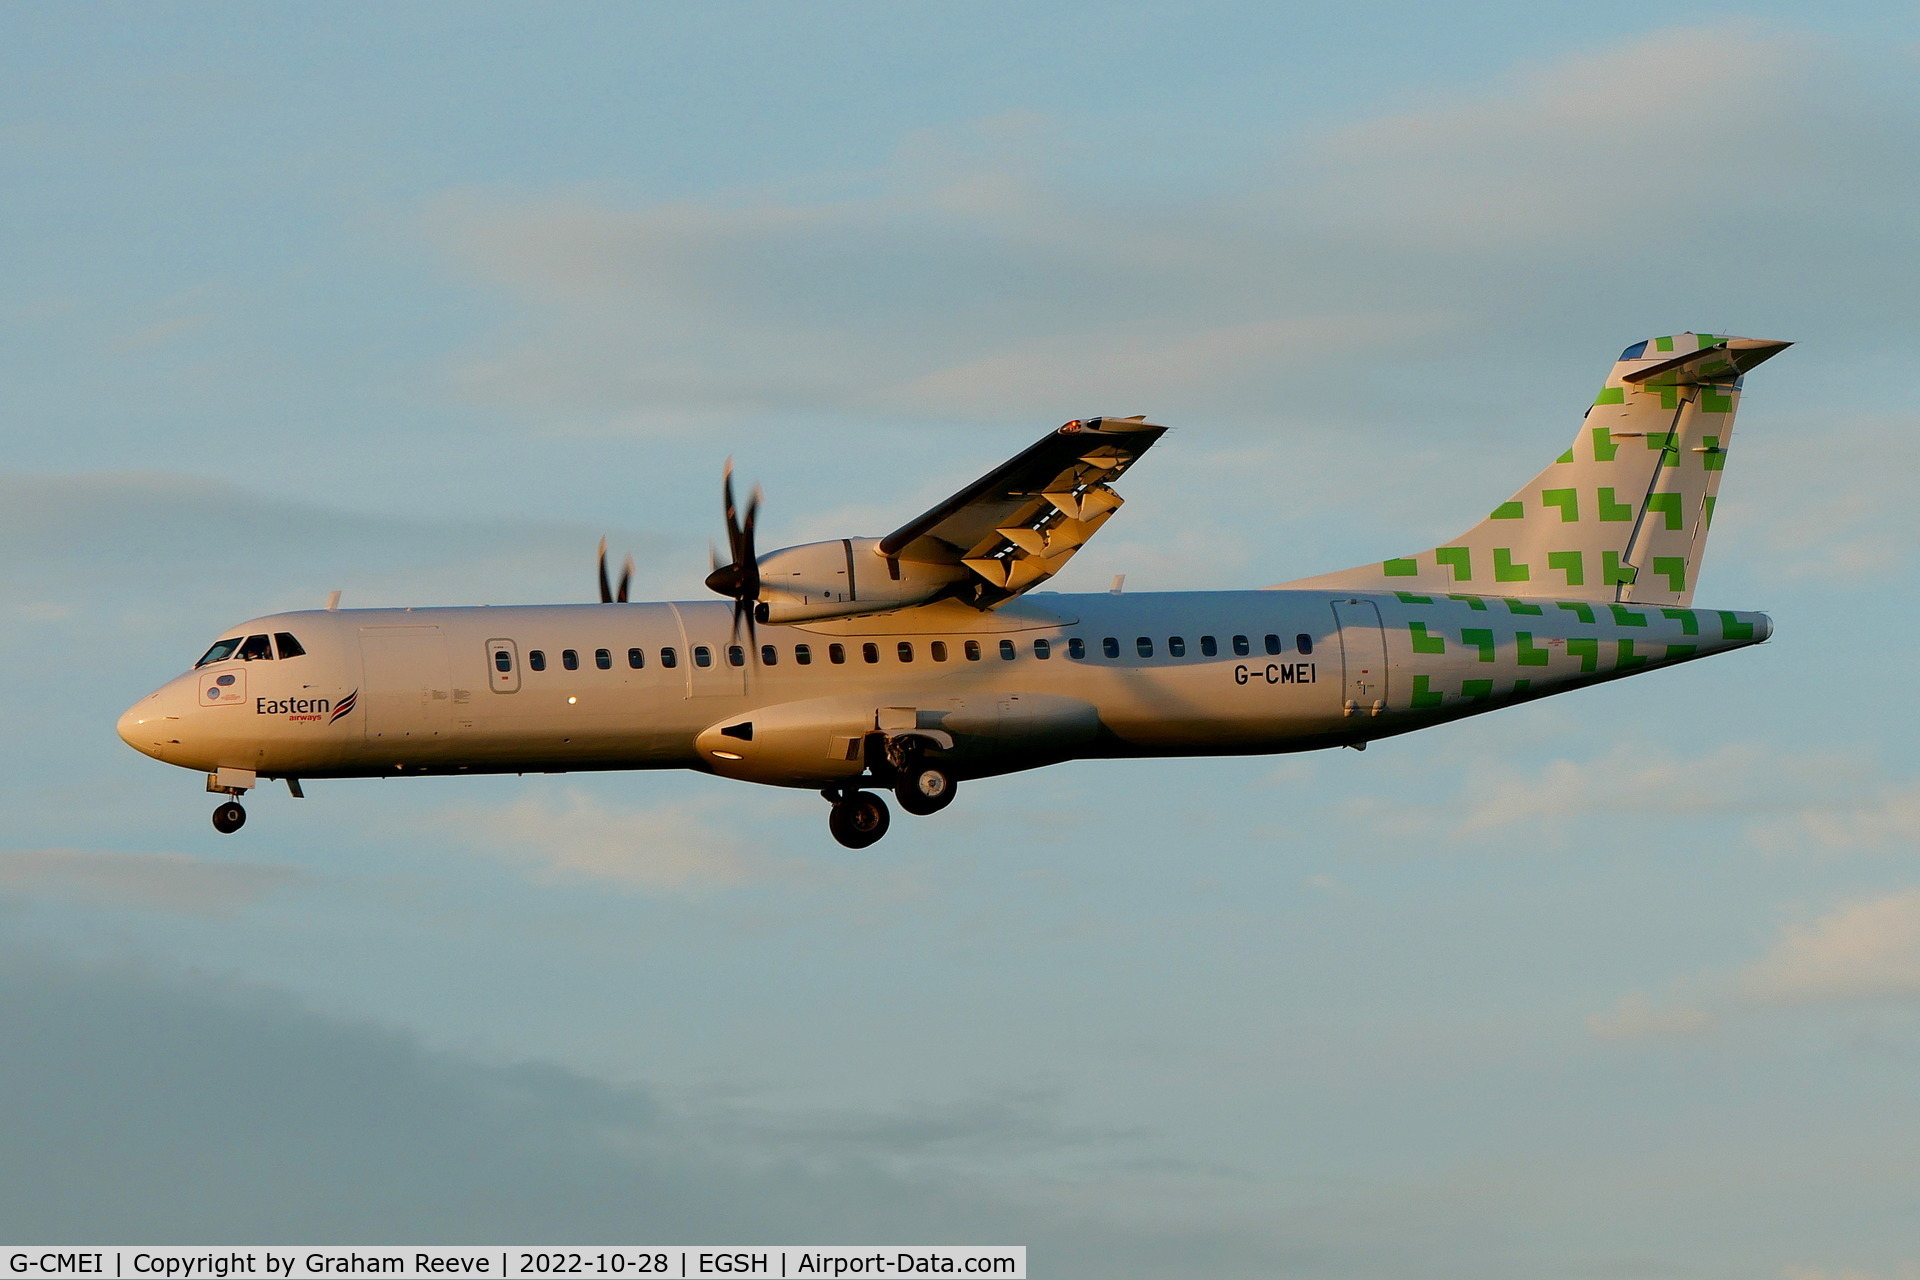 G-CMEI, 2015 ATR 72-212A C/N 1231, Landing just before sunset at Norwich.